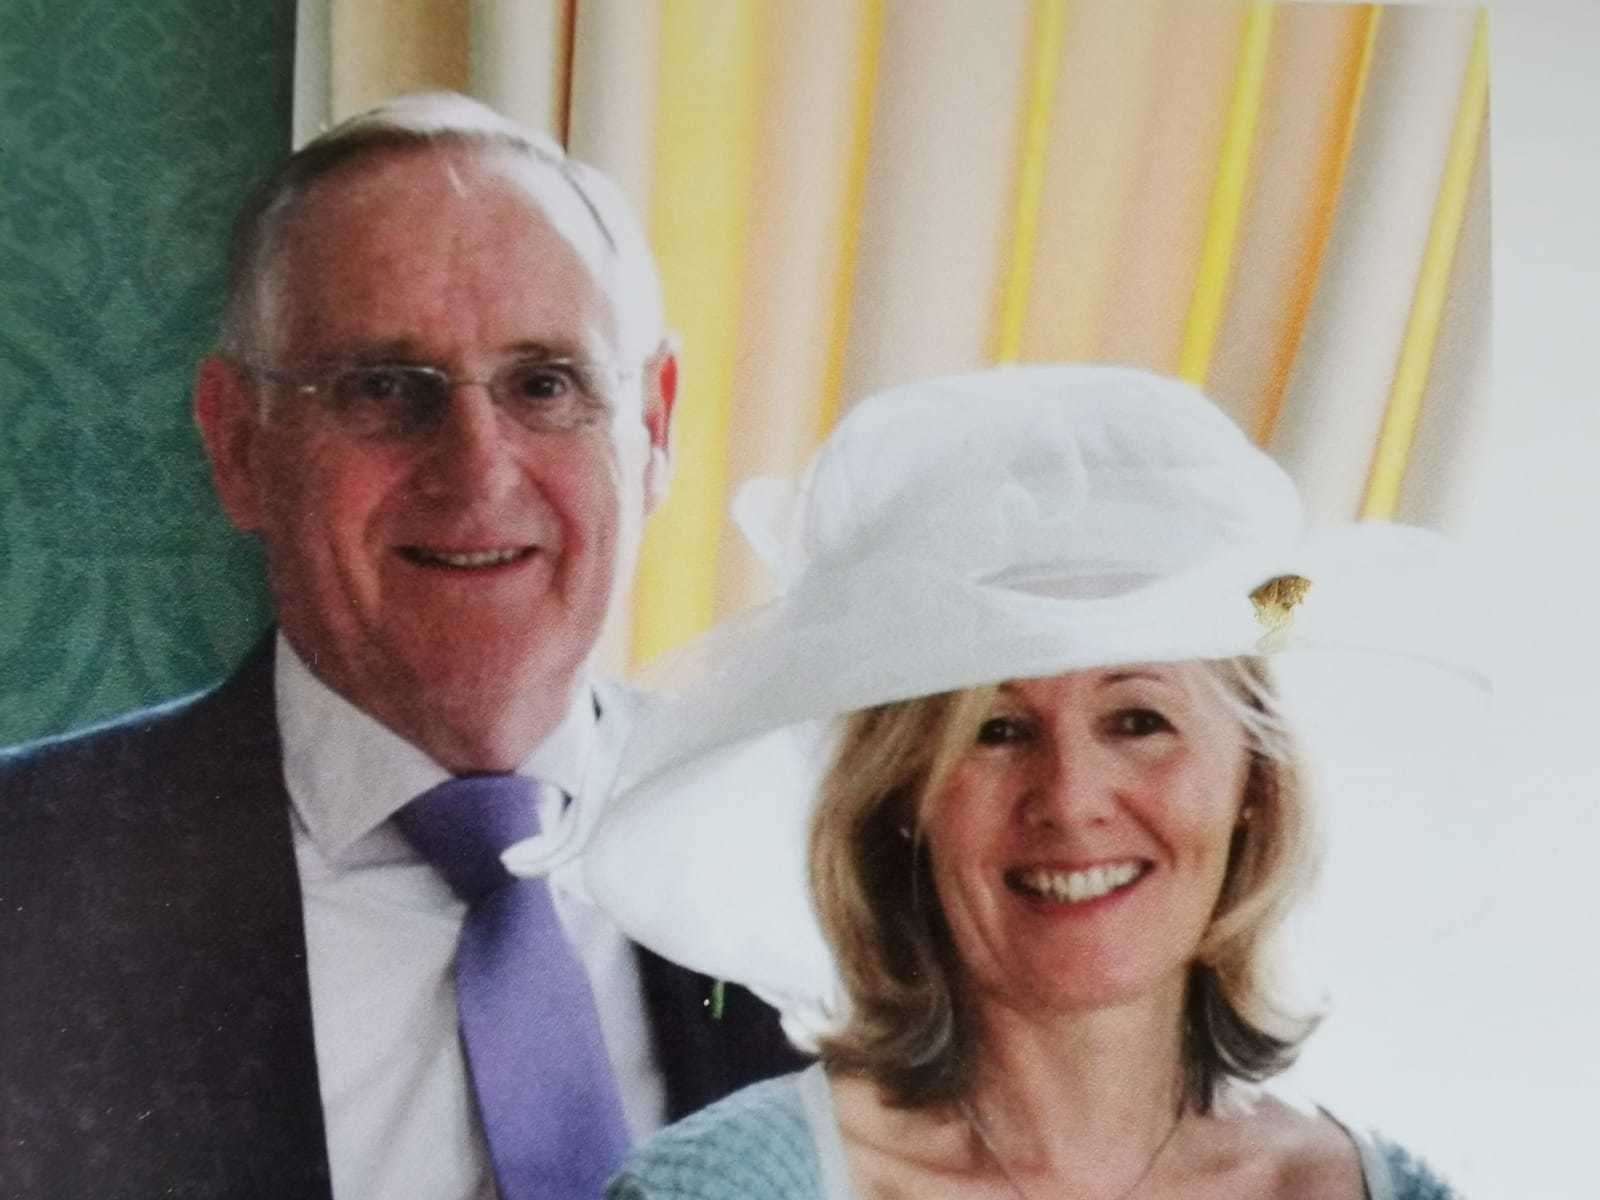 Colin and Hilary Smith